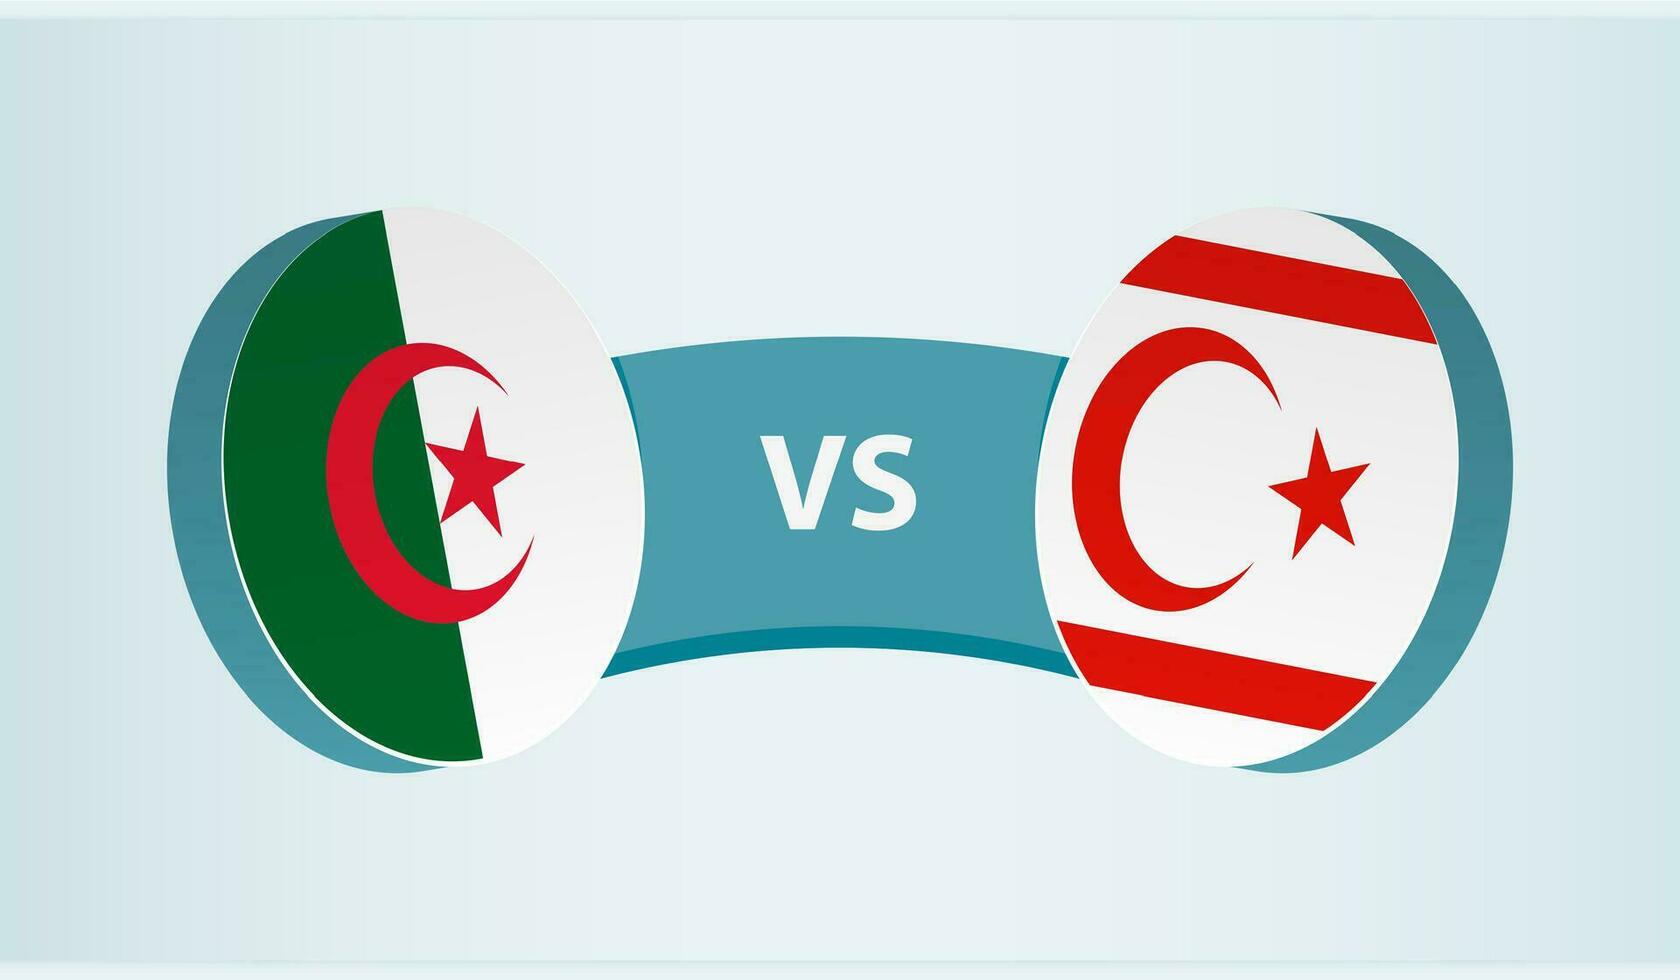 Algeria versus Northern Cyprus, team sports competition concept. vector